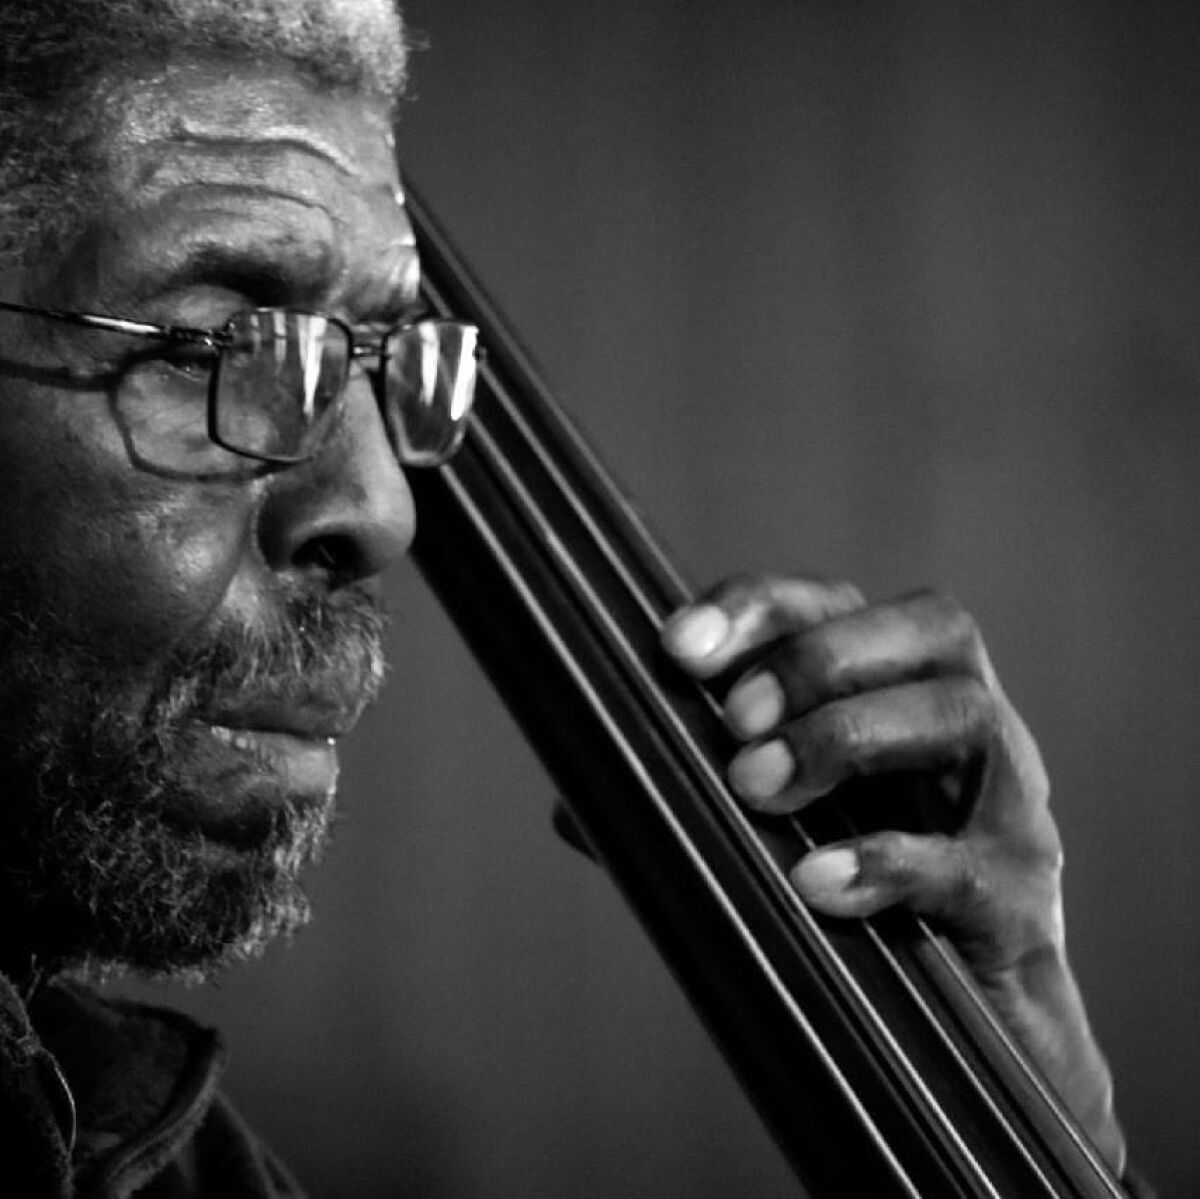 Marshall Hawkins will play Friday, March 24, as part of the La Jolla Community Center's Fourth Friday Jazz Series.